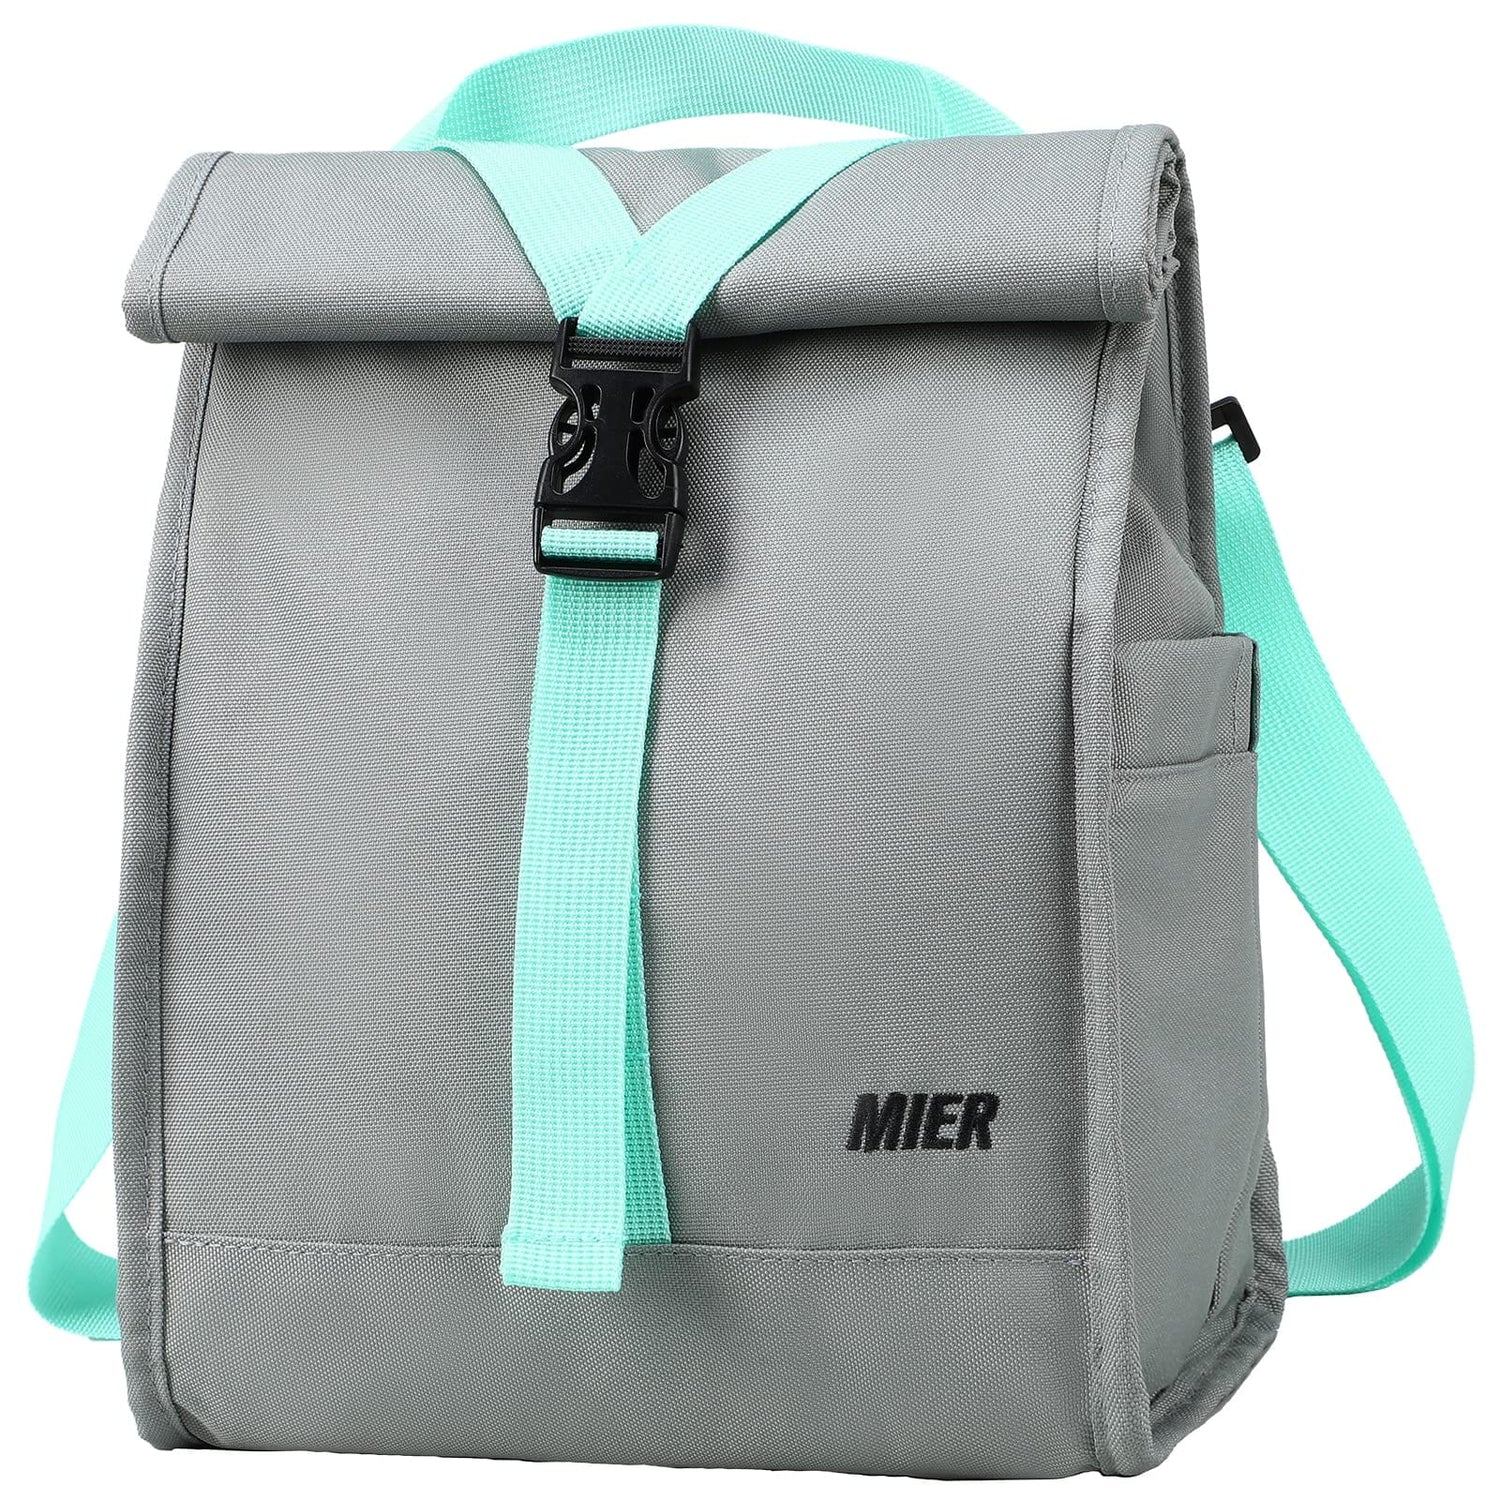 Insulated Lunch Bag Roll Top Lunch Box for Women Men Fashionable Lunch Bag Gray Green MIER